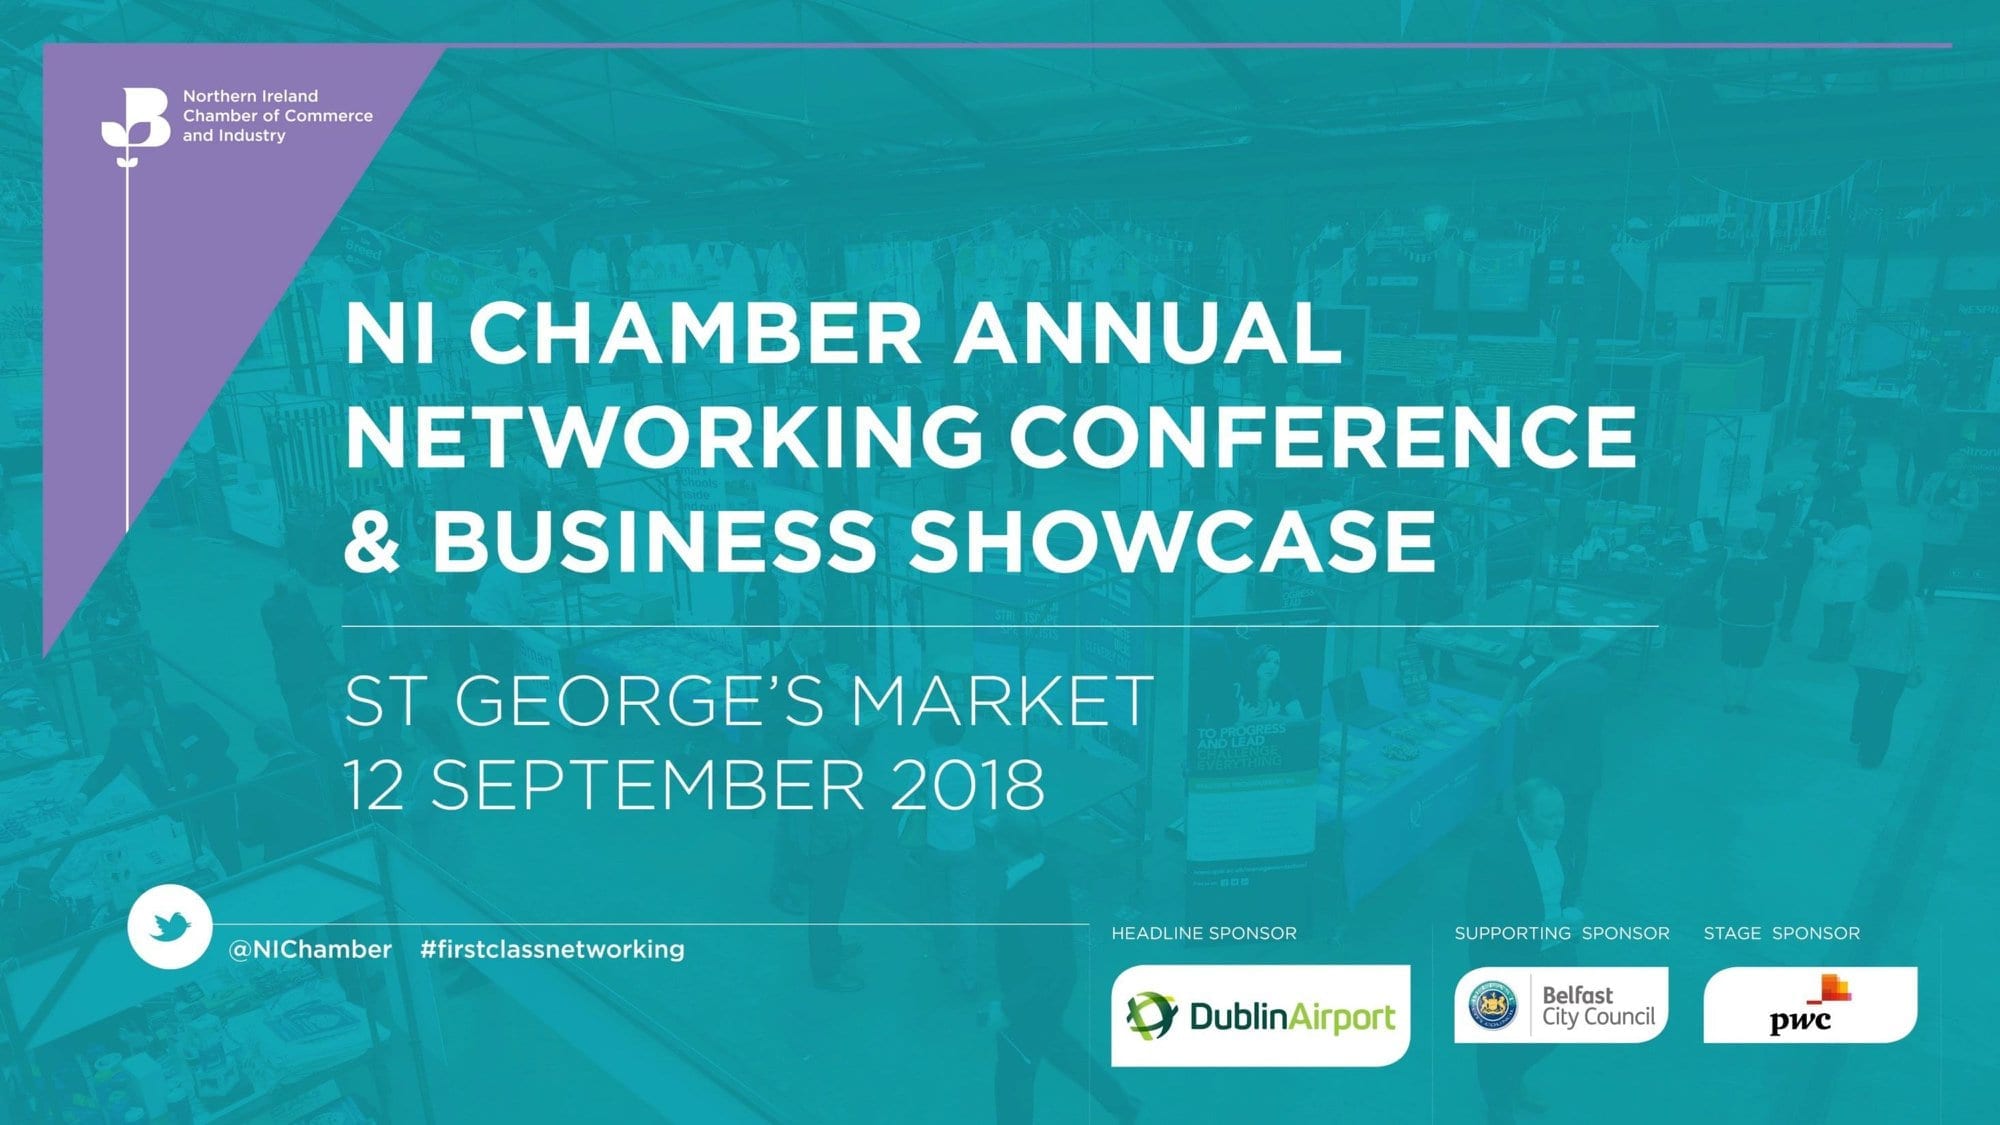 NI chamber annual networking conference & business showcase